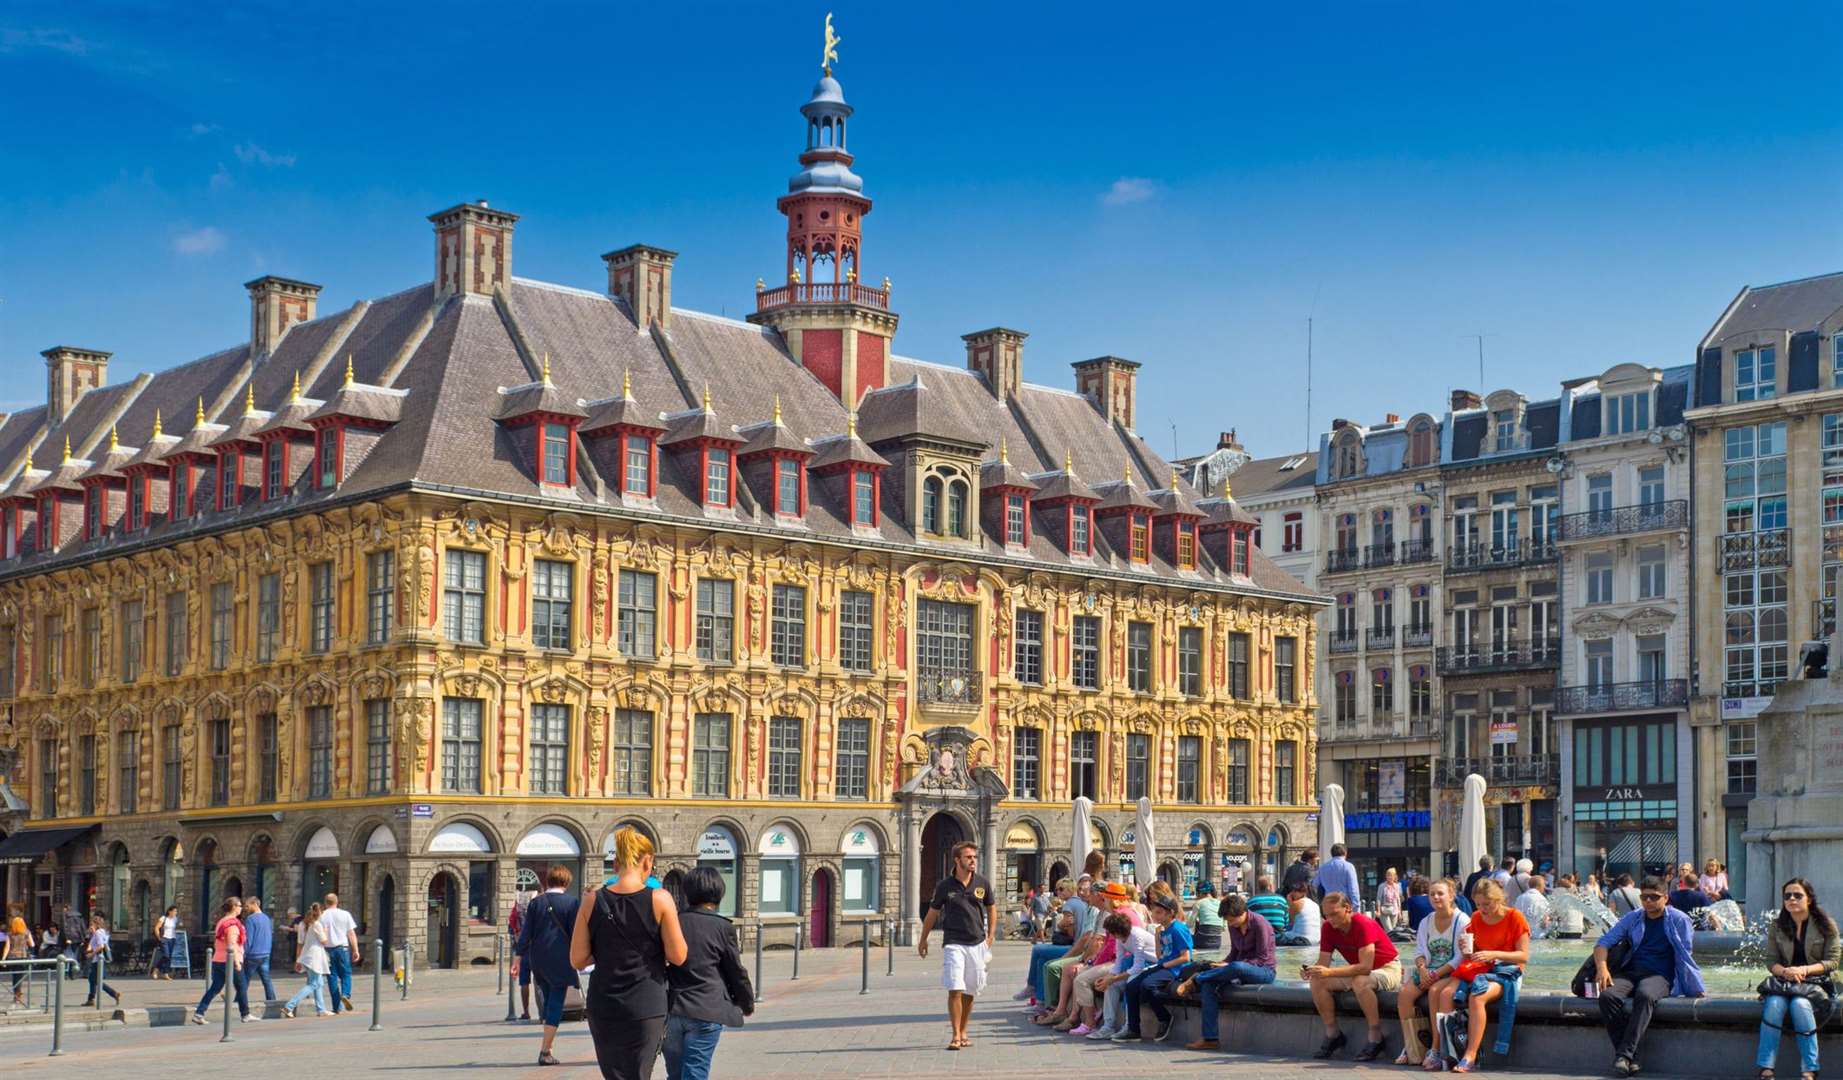 Lille boasts an array of fascinating architectural styles with various amounts of Flemish influence, including the use of brown and red brick.